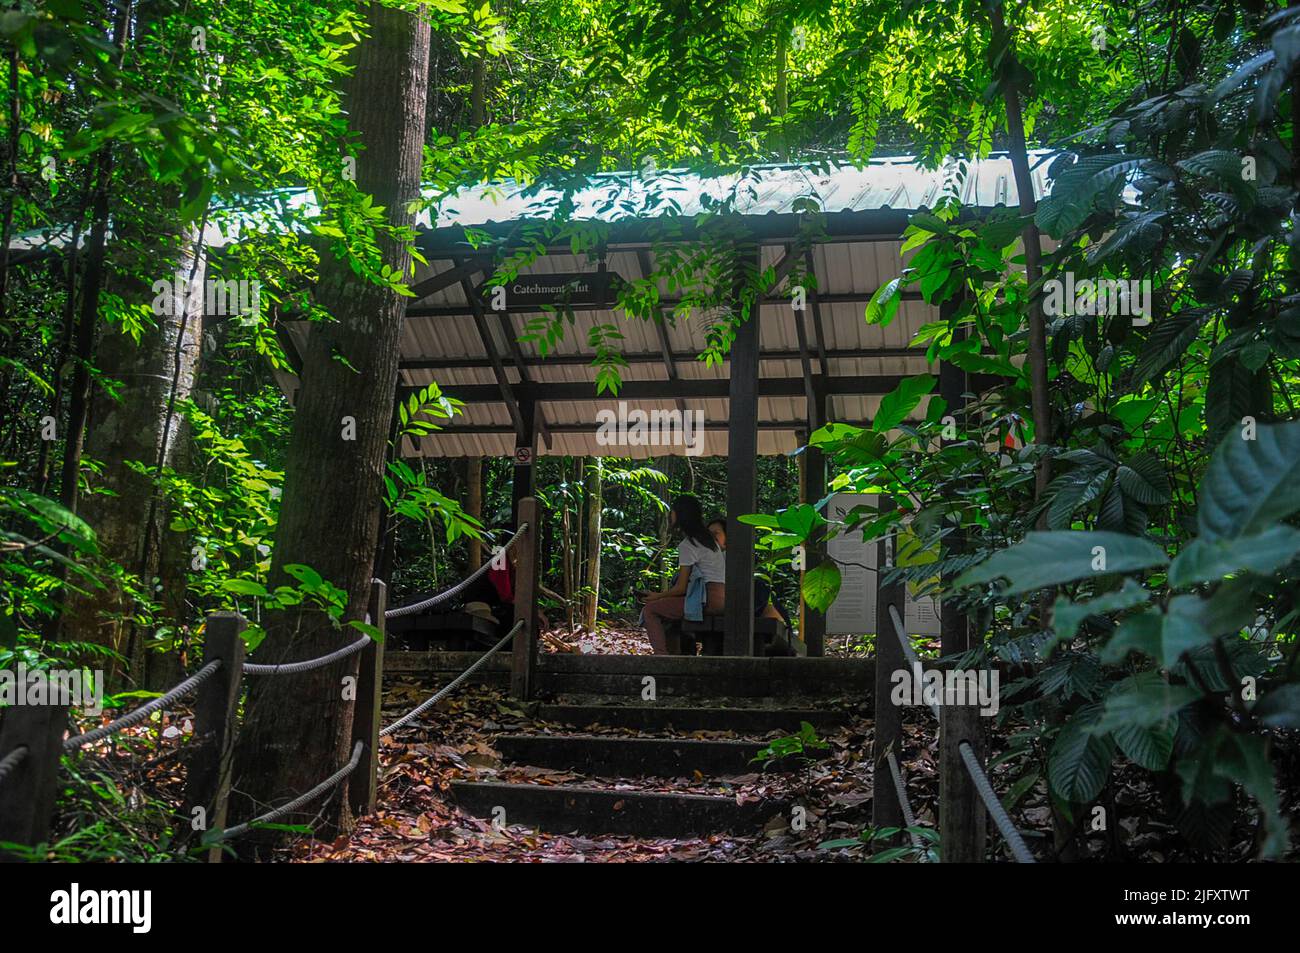 At the South View Hut on Bukit Timah Nature Reserve, Singapore Stock Photo